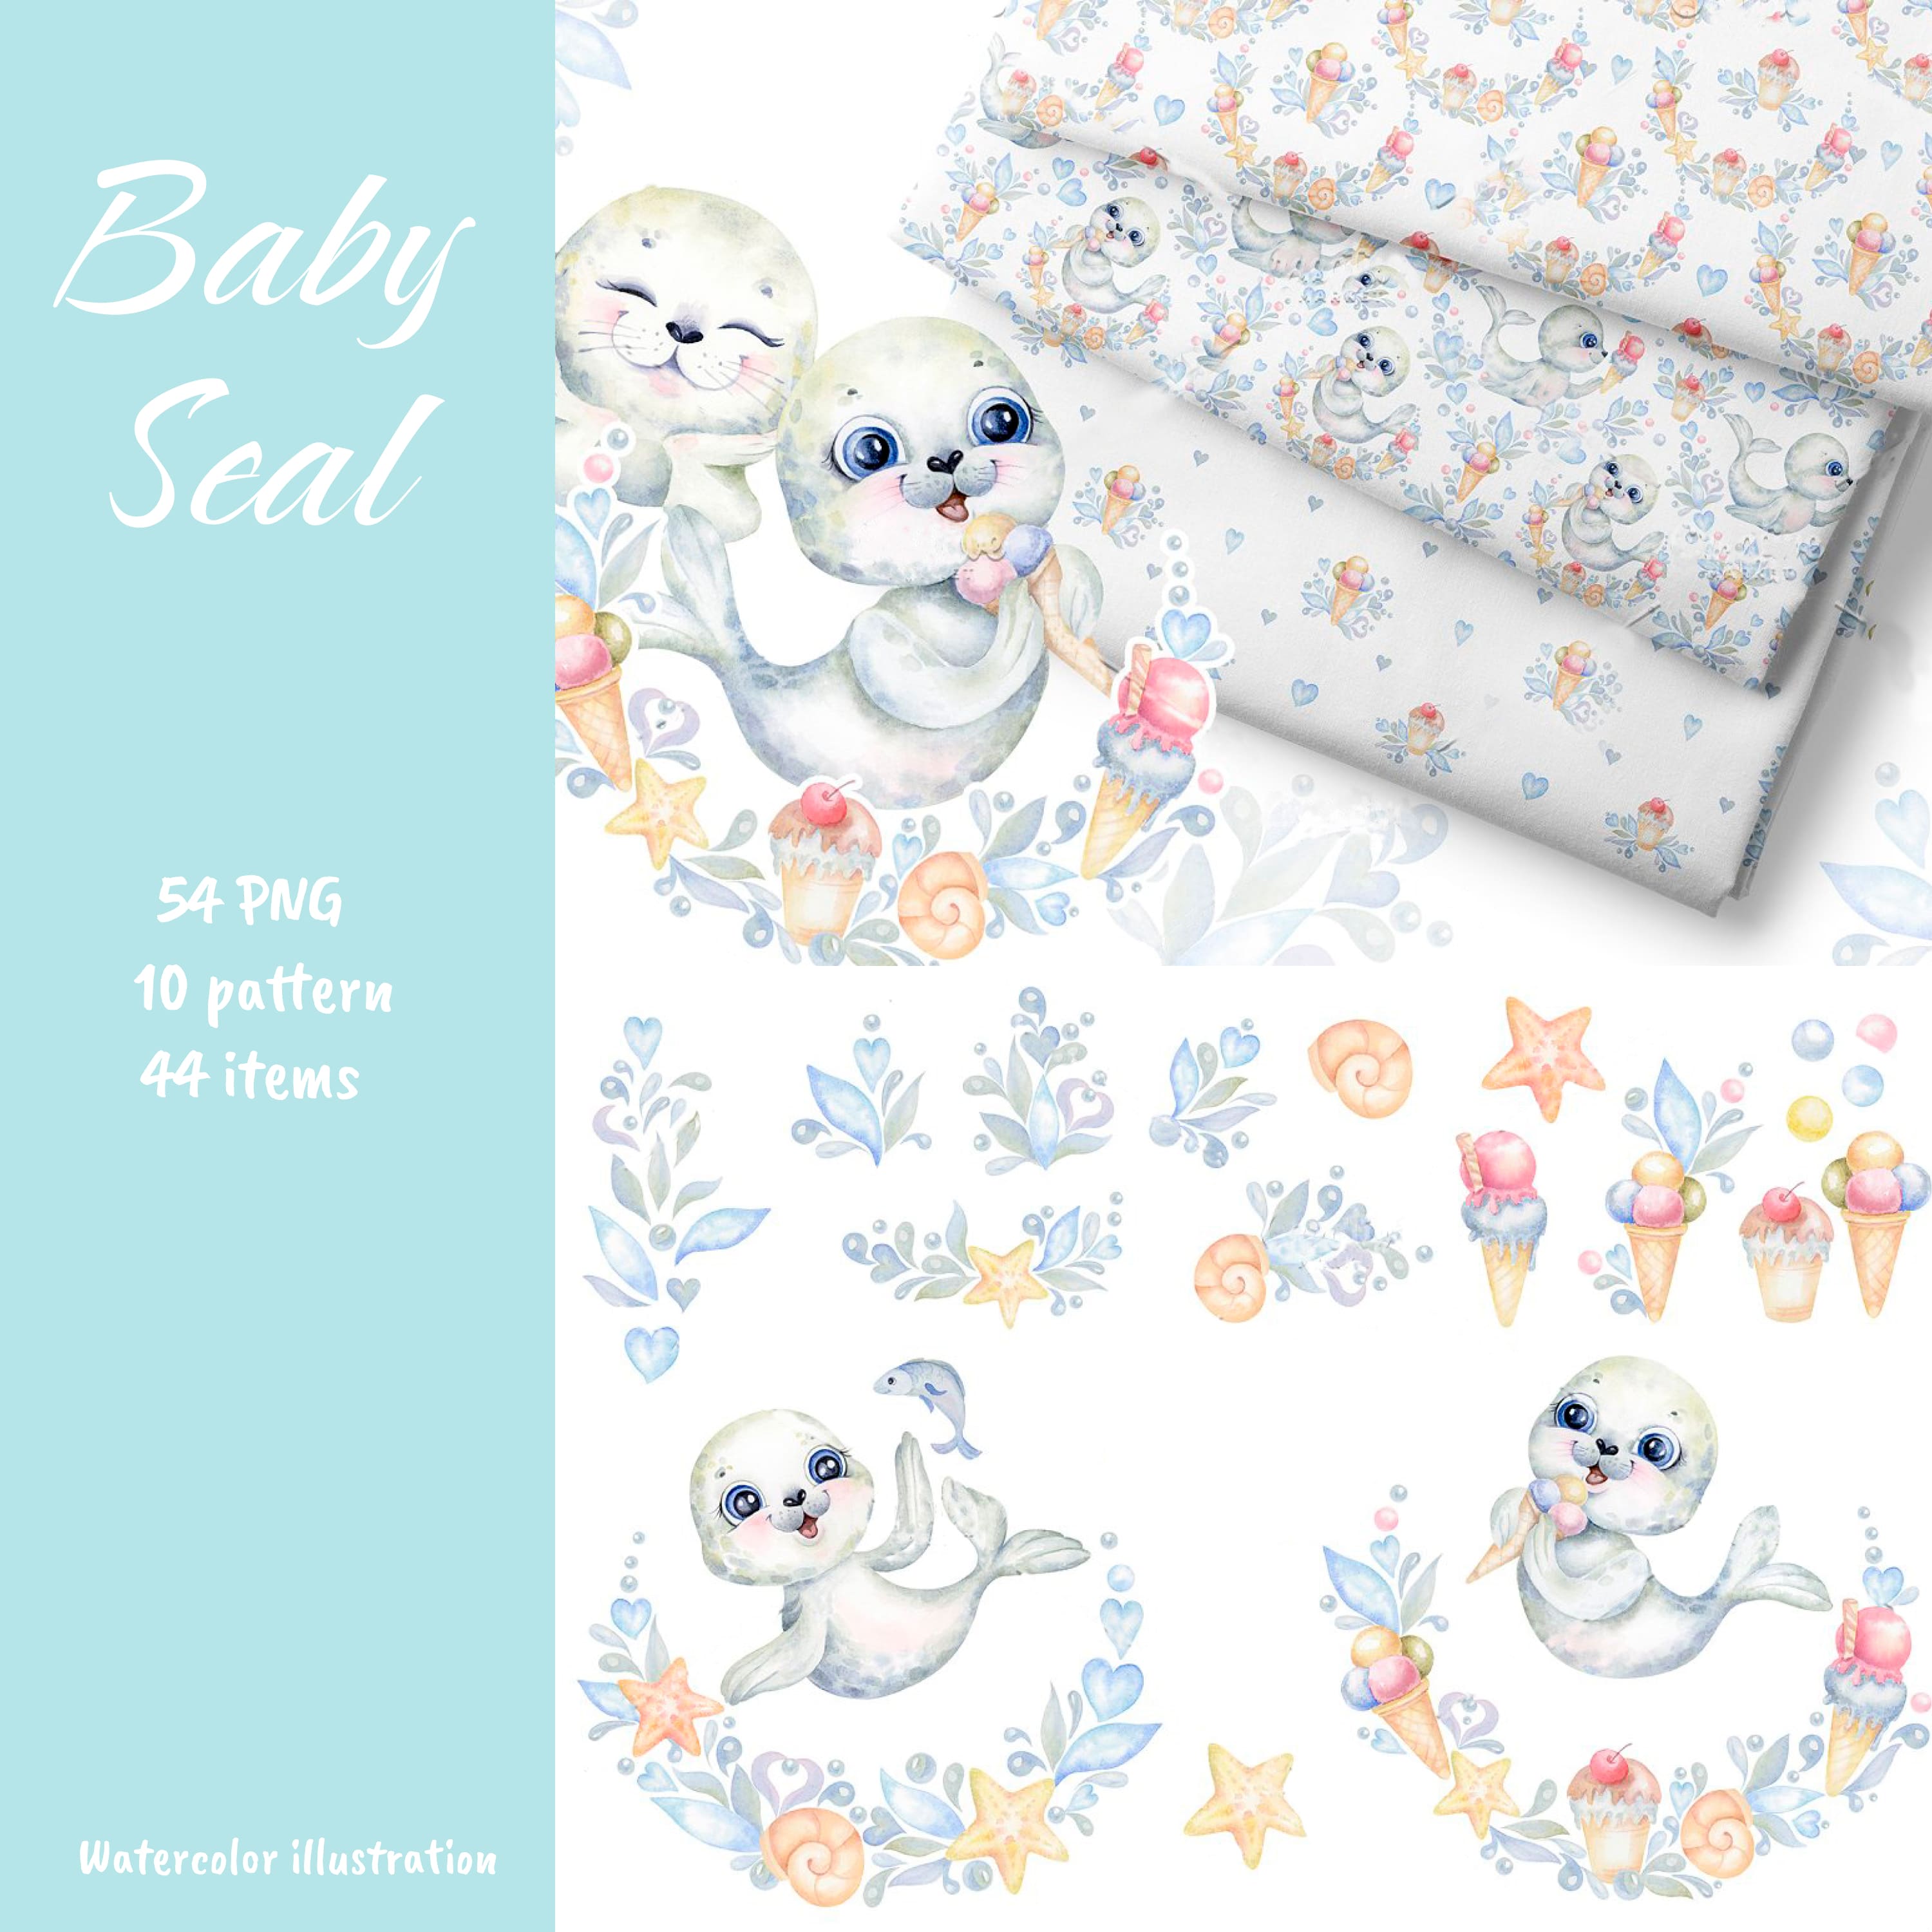 Baby Seal animals clipart & pattern.